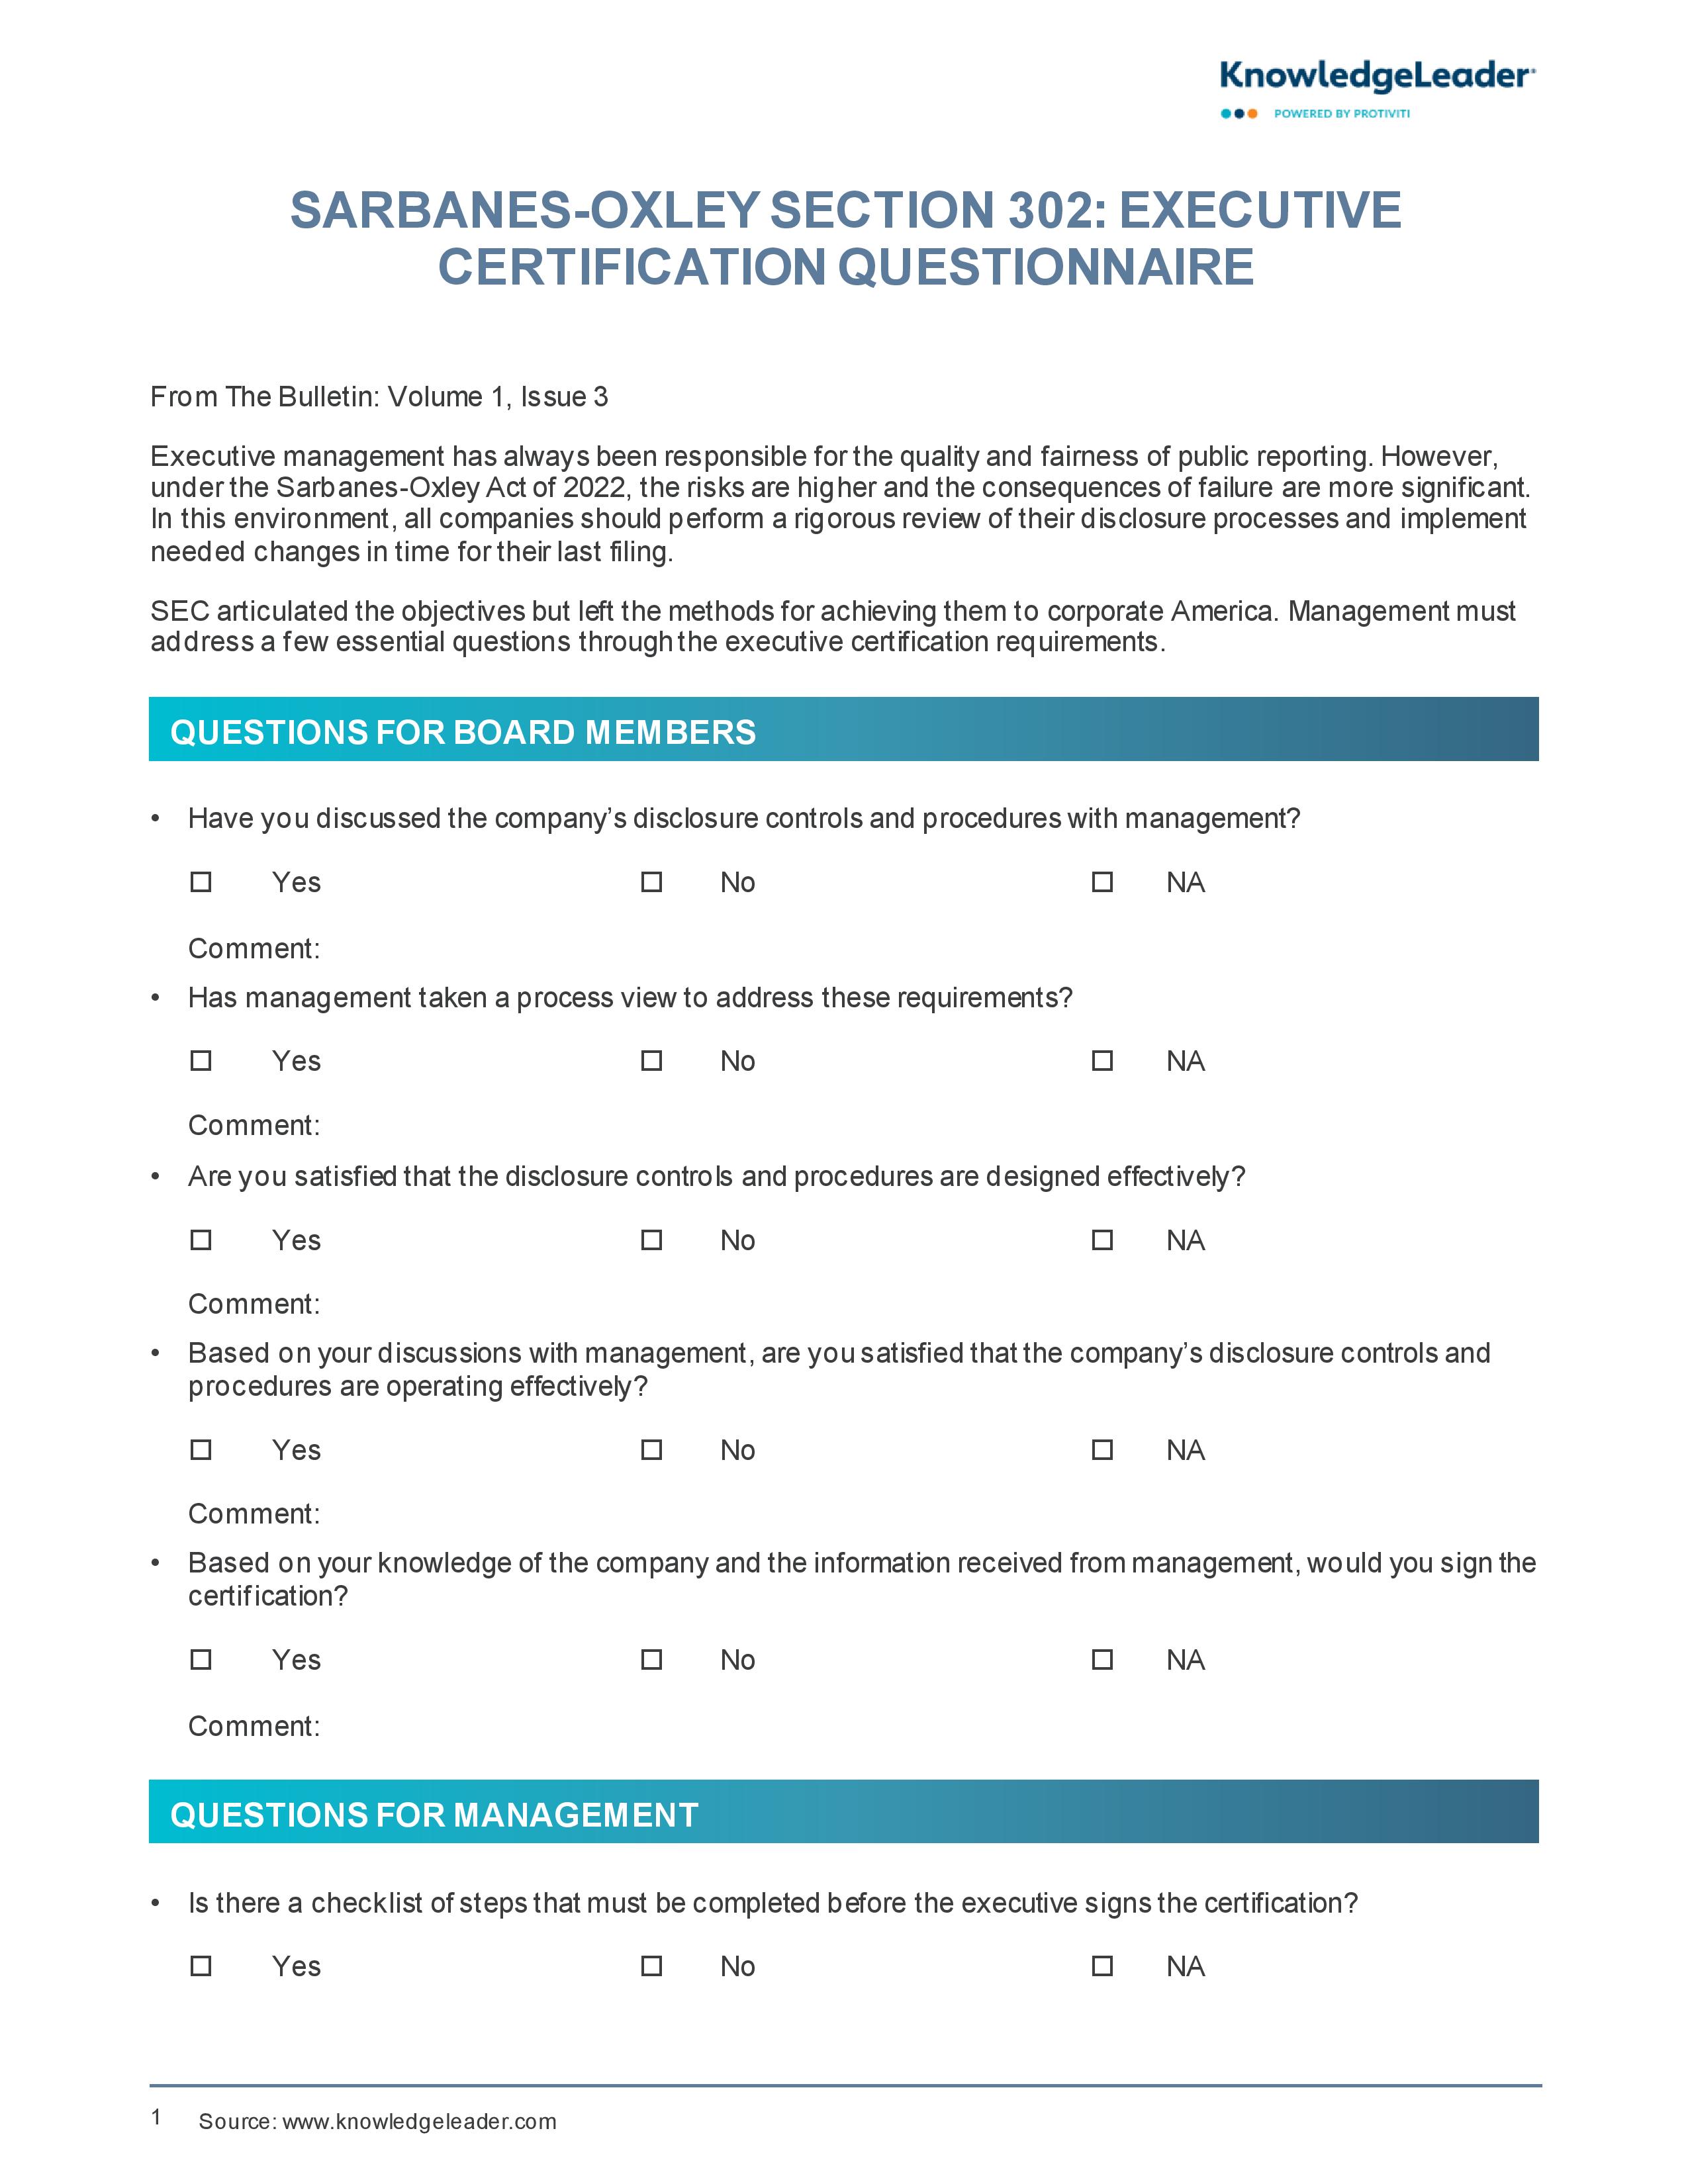 Screenshot of the first page of Sarbanes-Oxley Section 302 - Executive Certification Questionnaire